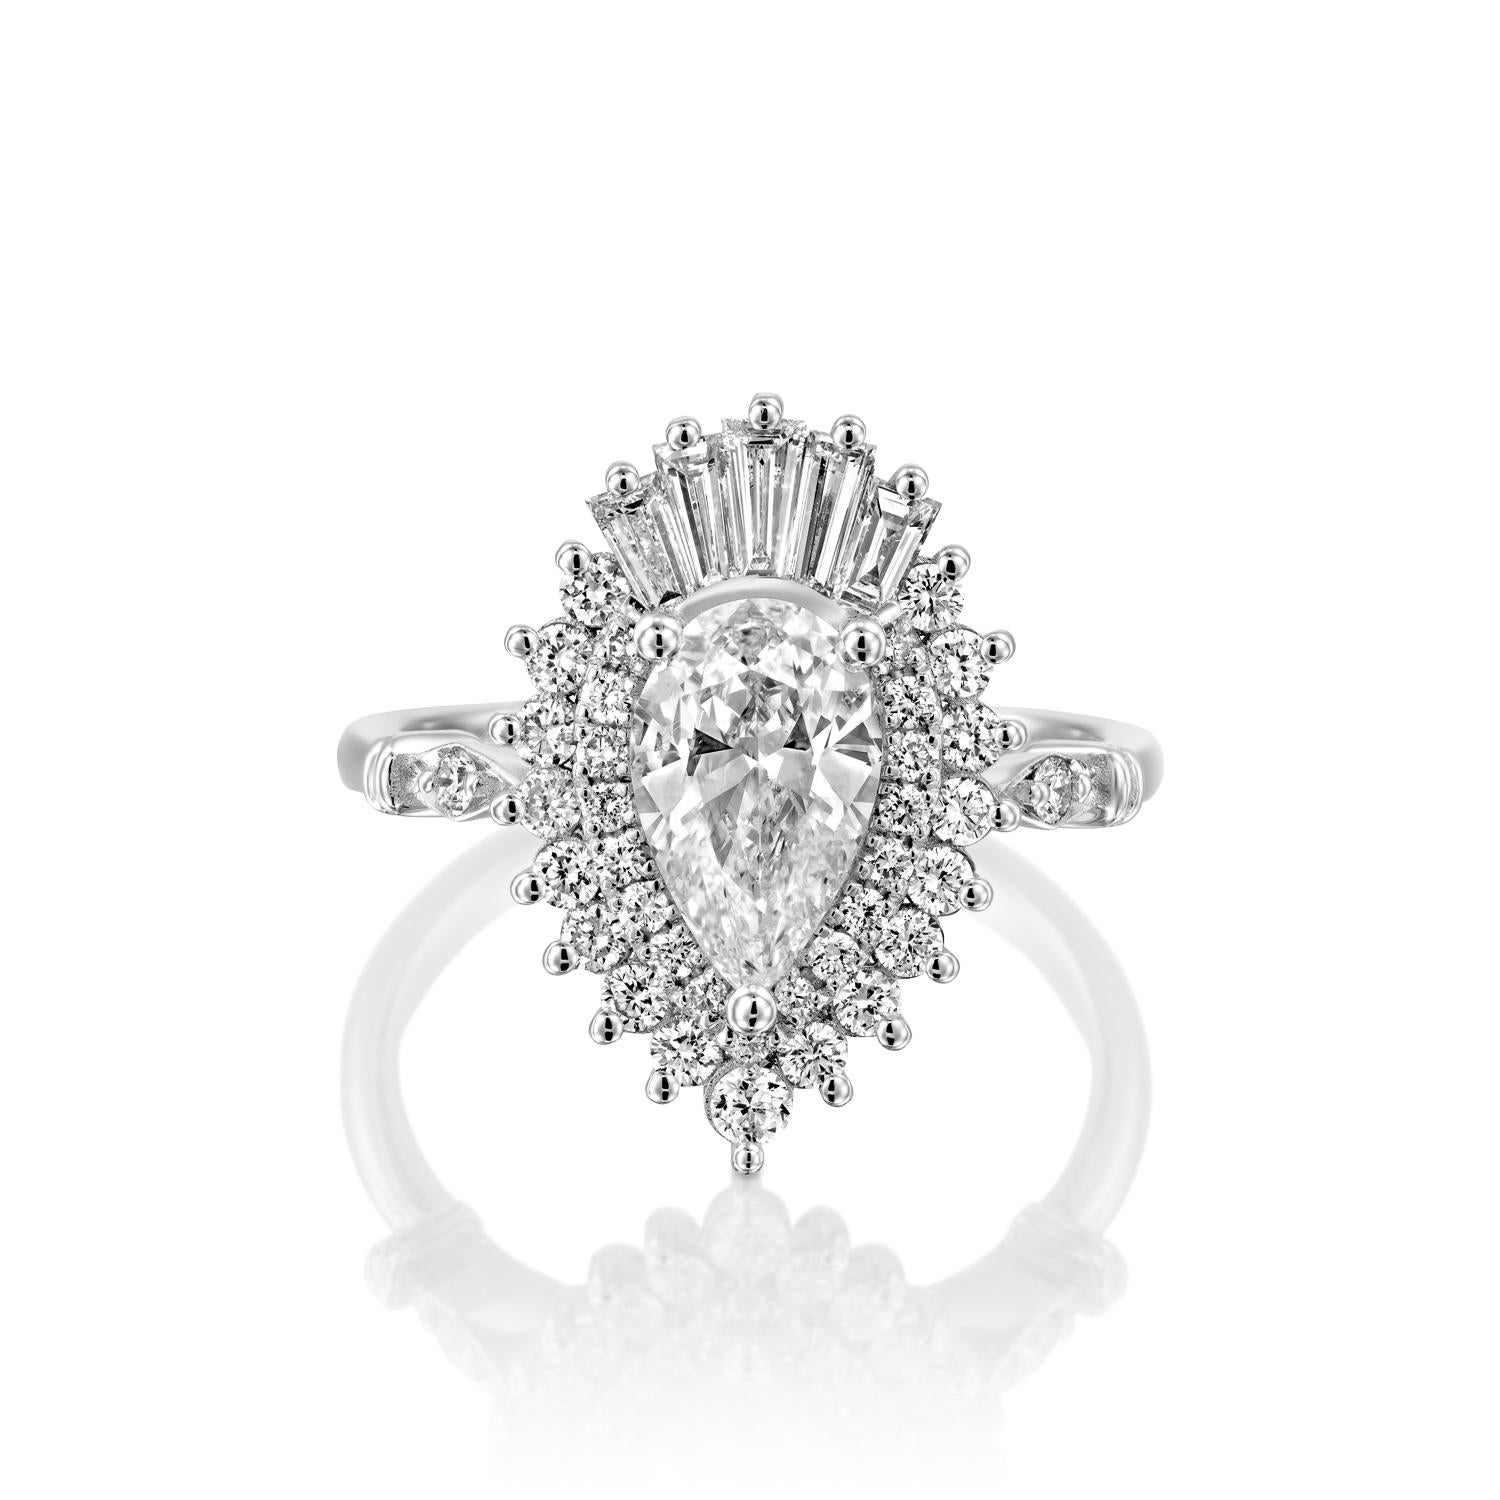 Beautiful solitaire with accents Gatsby style GIA certified diamond engagement ring. Ring features a 3/4 carat pear cut natural diamond of F-G color and VS2-SI1 clarity and it is surrounded by smaller natural diamonds of approx. 3/4 carat total